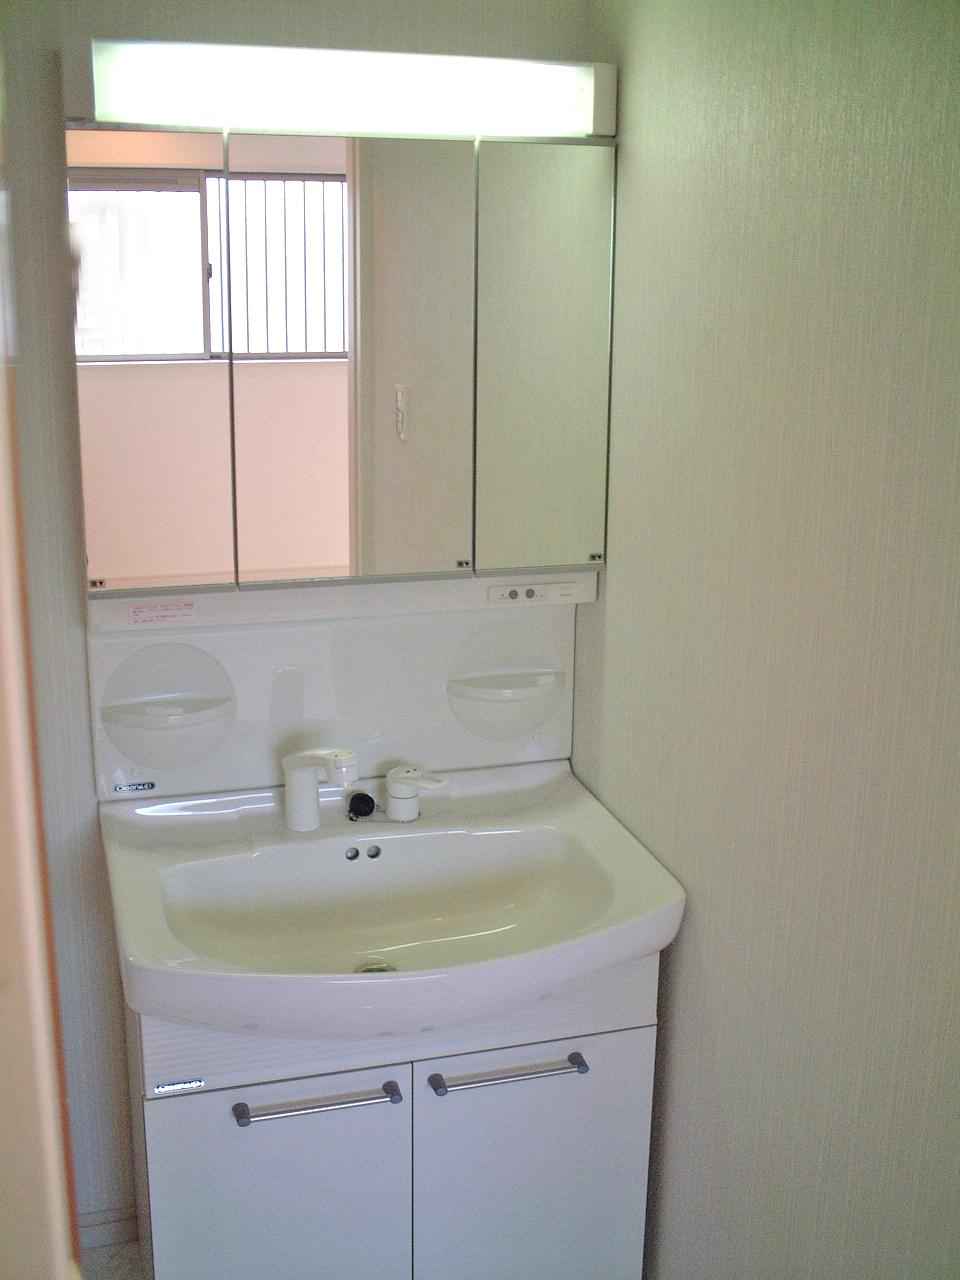 Same specifications photos (Other introspection). Same specifications washbasin